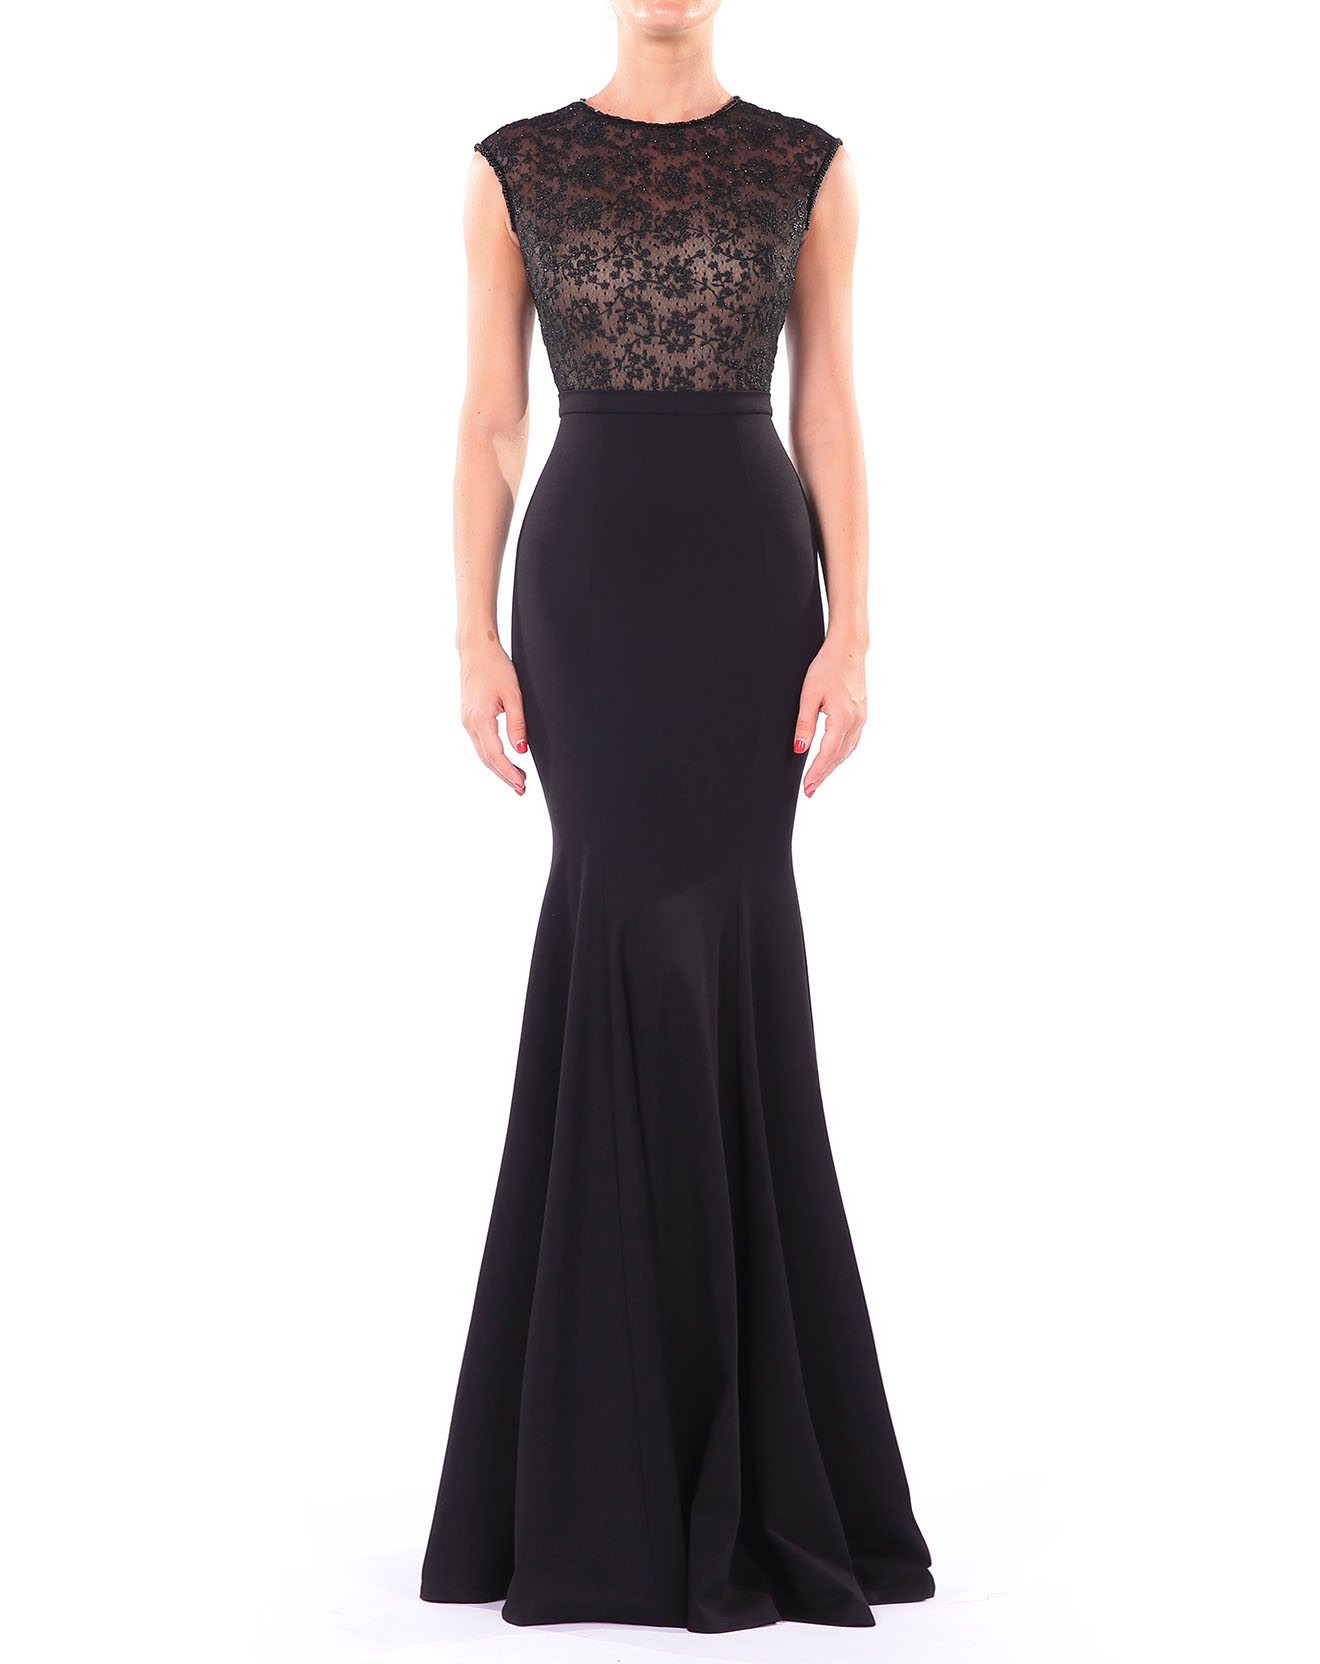 lea lis by isabel garcia - robe longue broderies strass noire